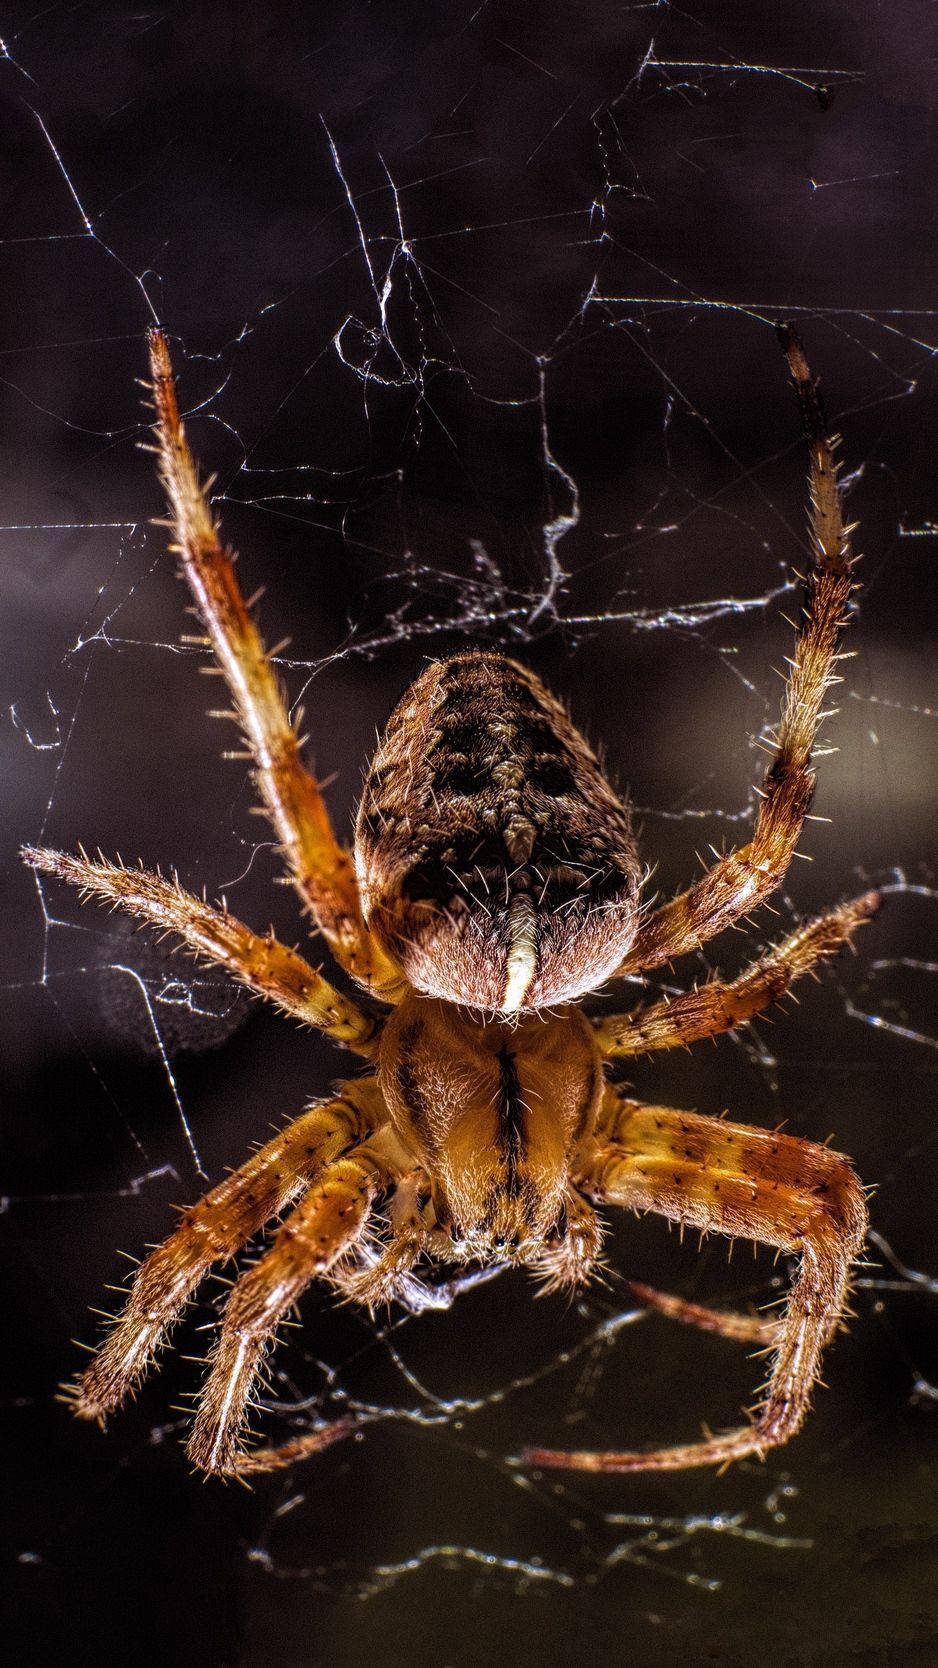 Spider Covered In Microscopic Hairs Background